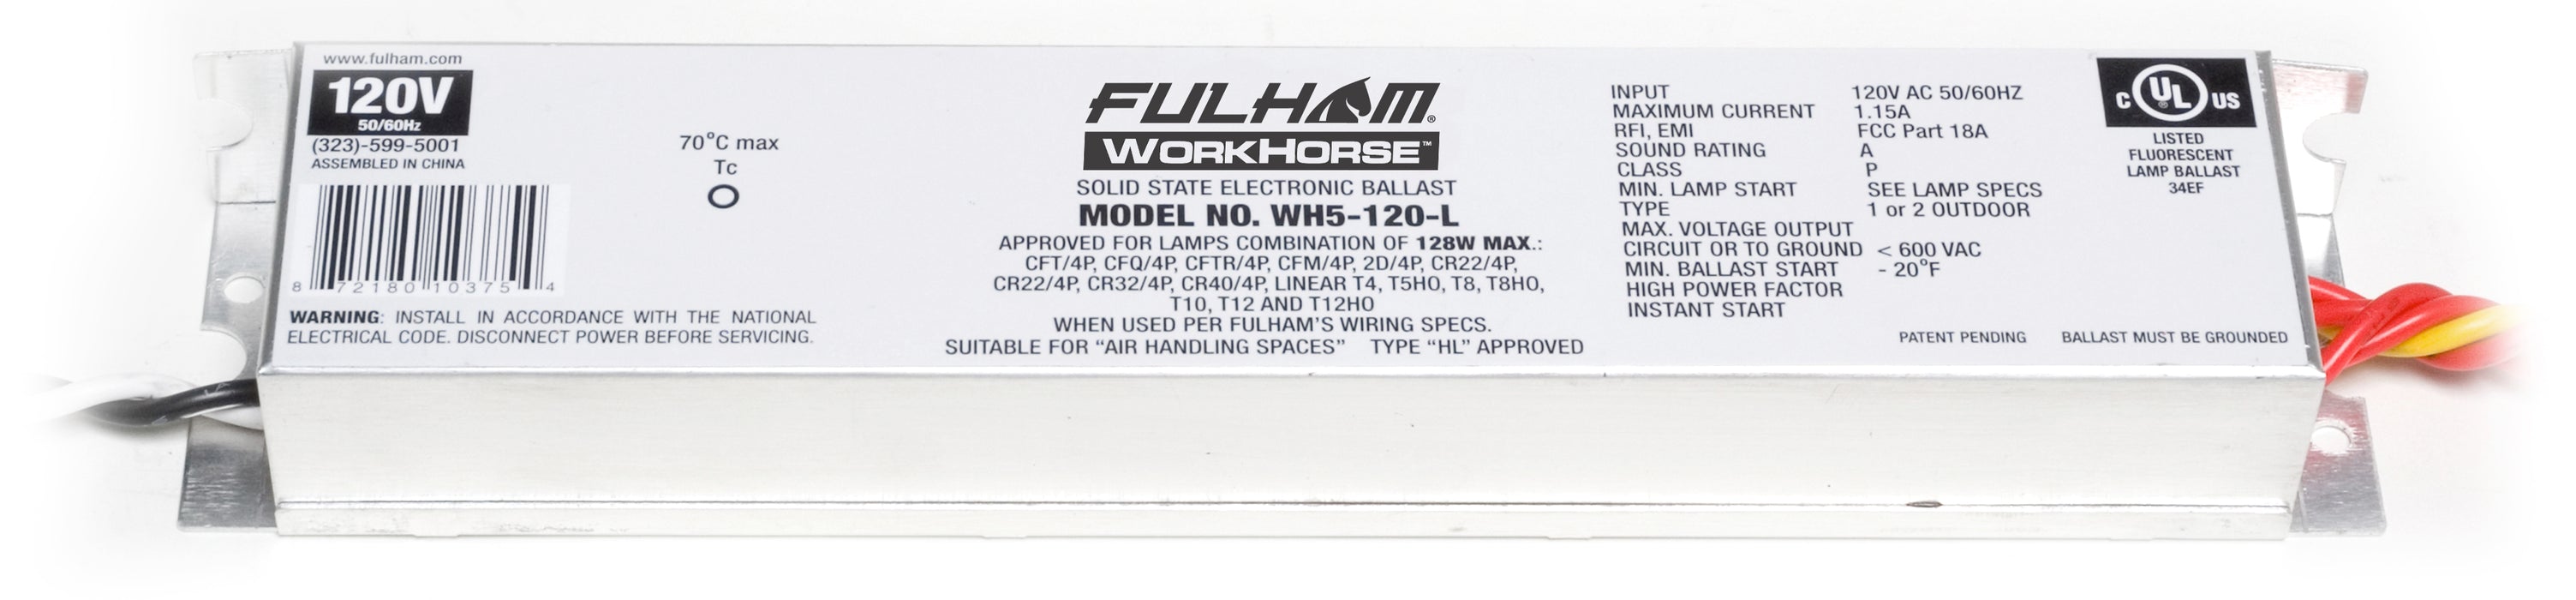 Fulham Instant Start Electronic Fluorescent Workhorse Ballast For (1-4) 128W Maximum Lamps Run At 120V (WH5-120-L)